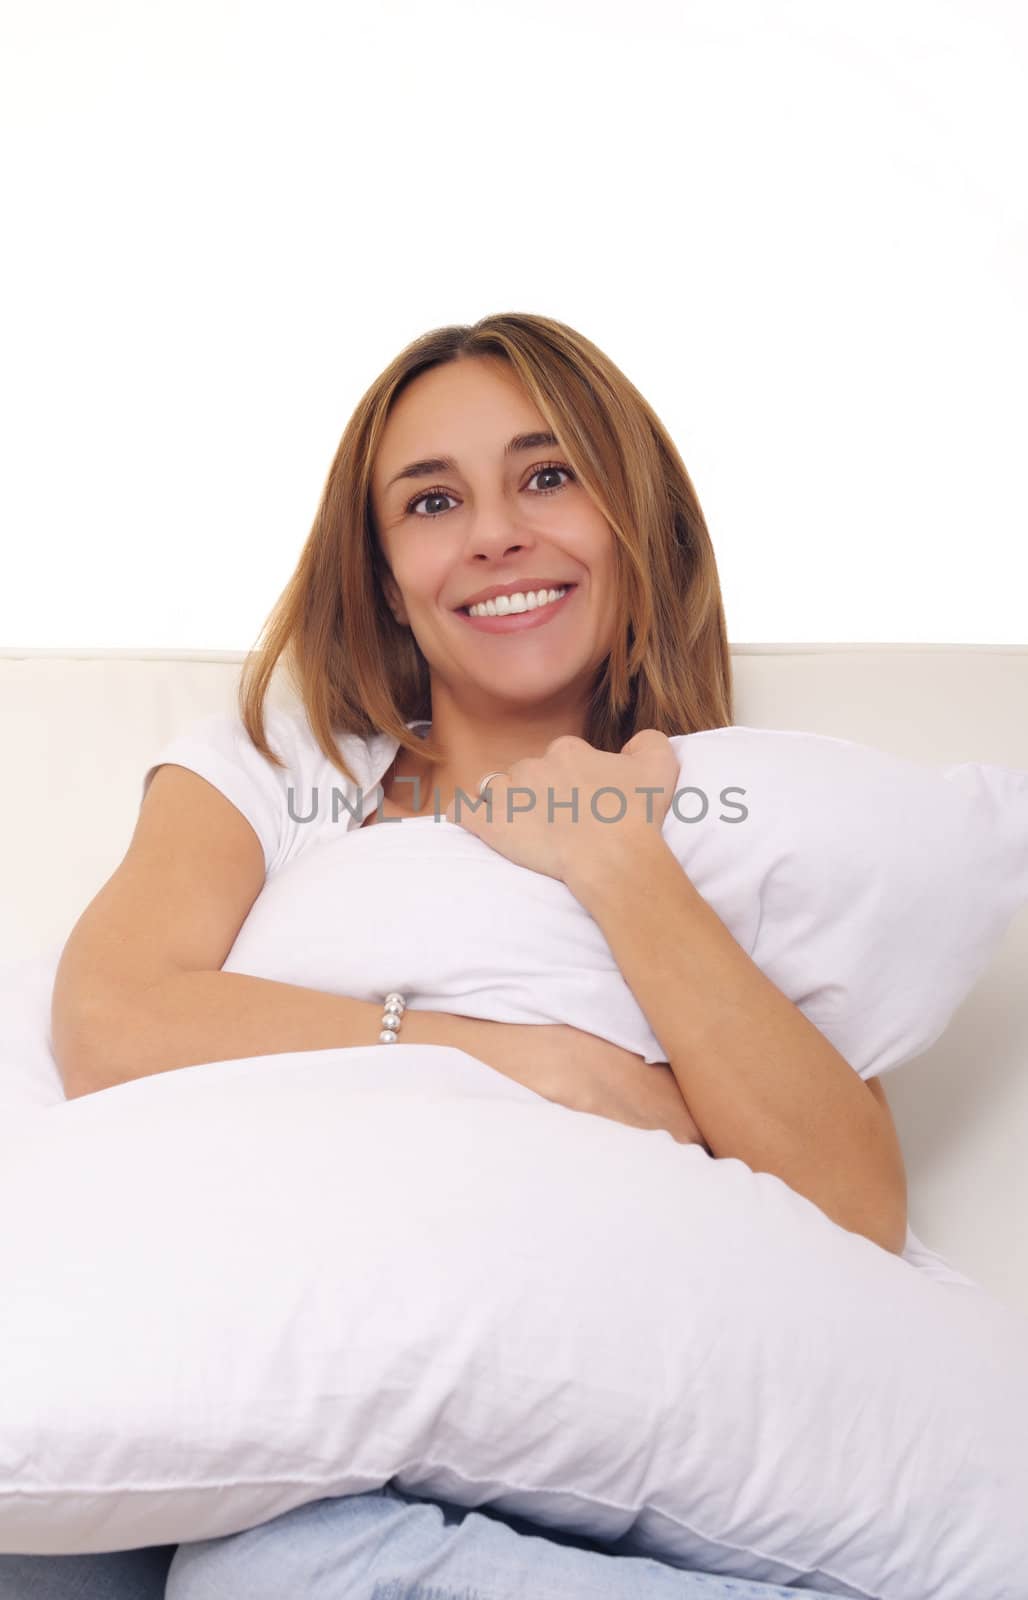 smiling young woman embracing cushion pillow by matteobragaglio